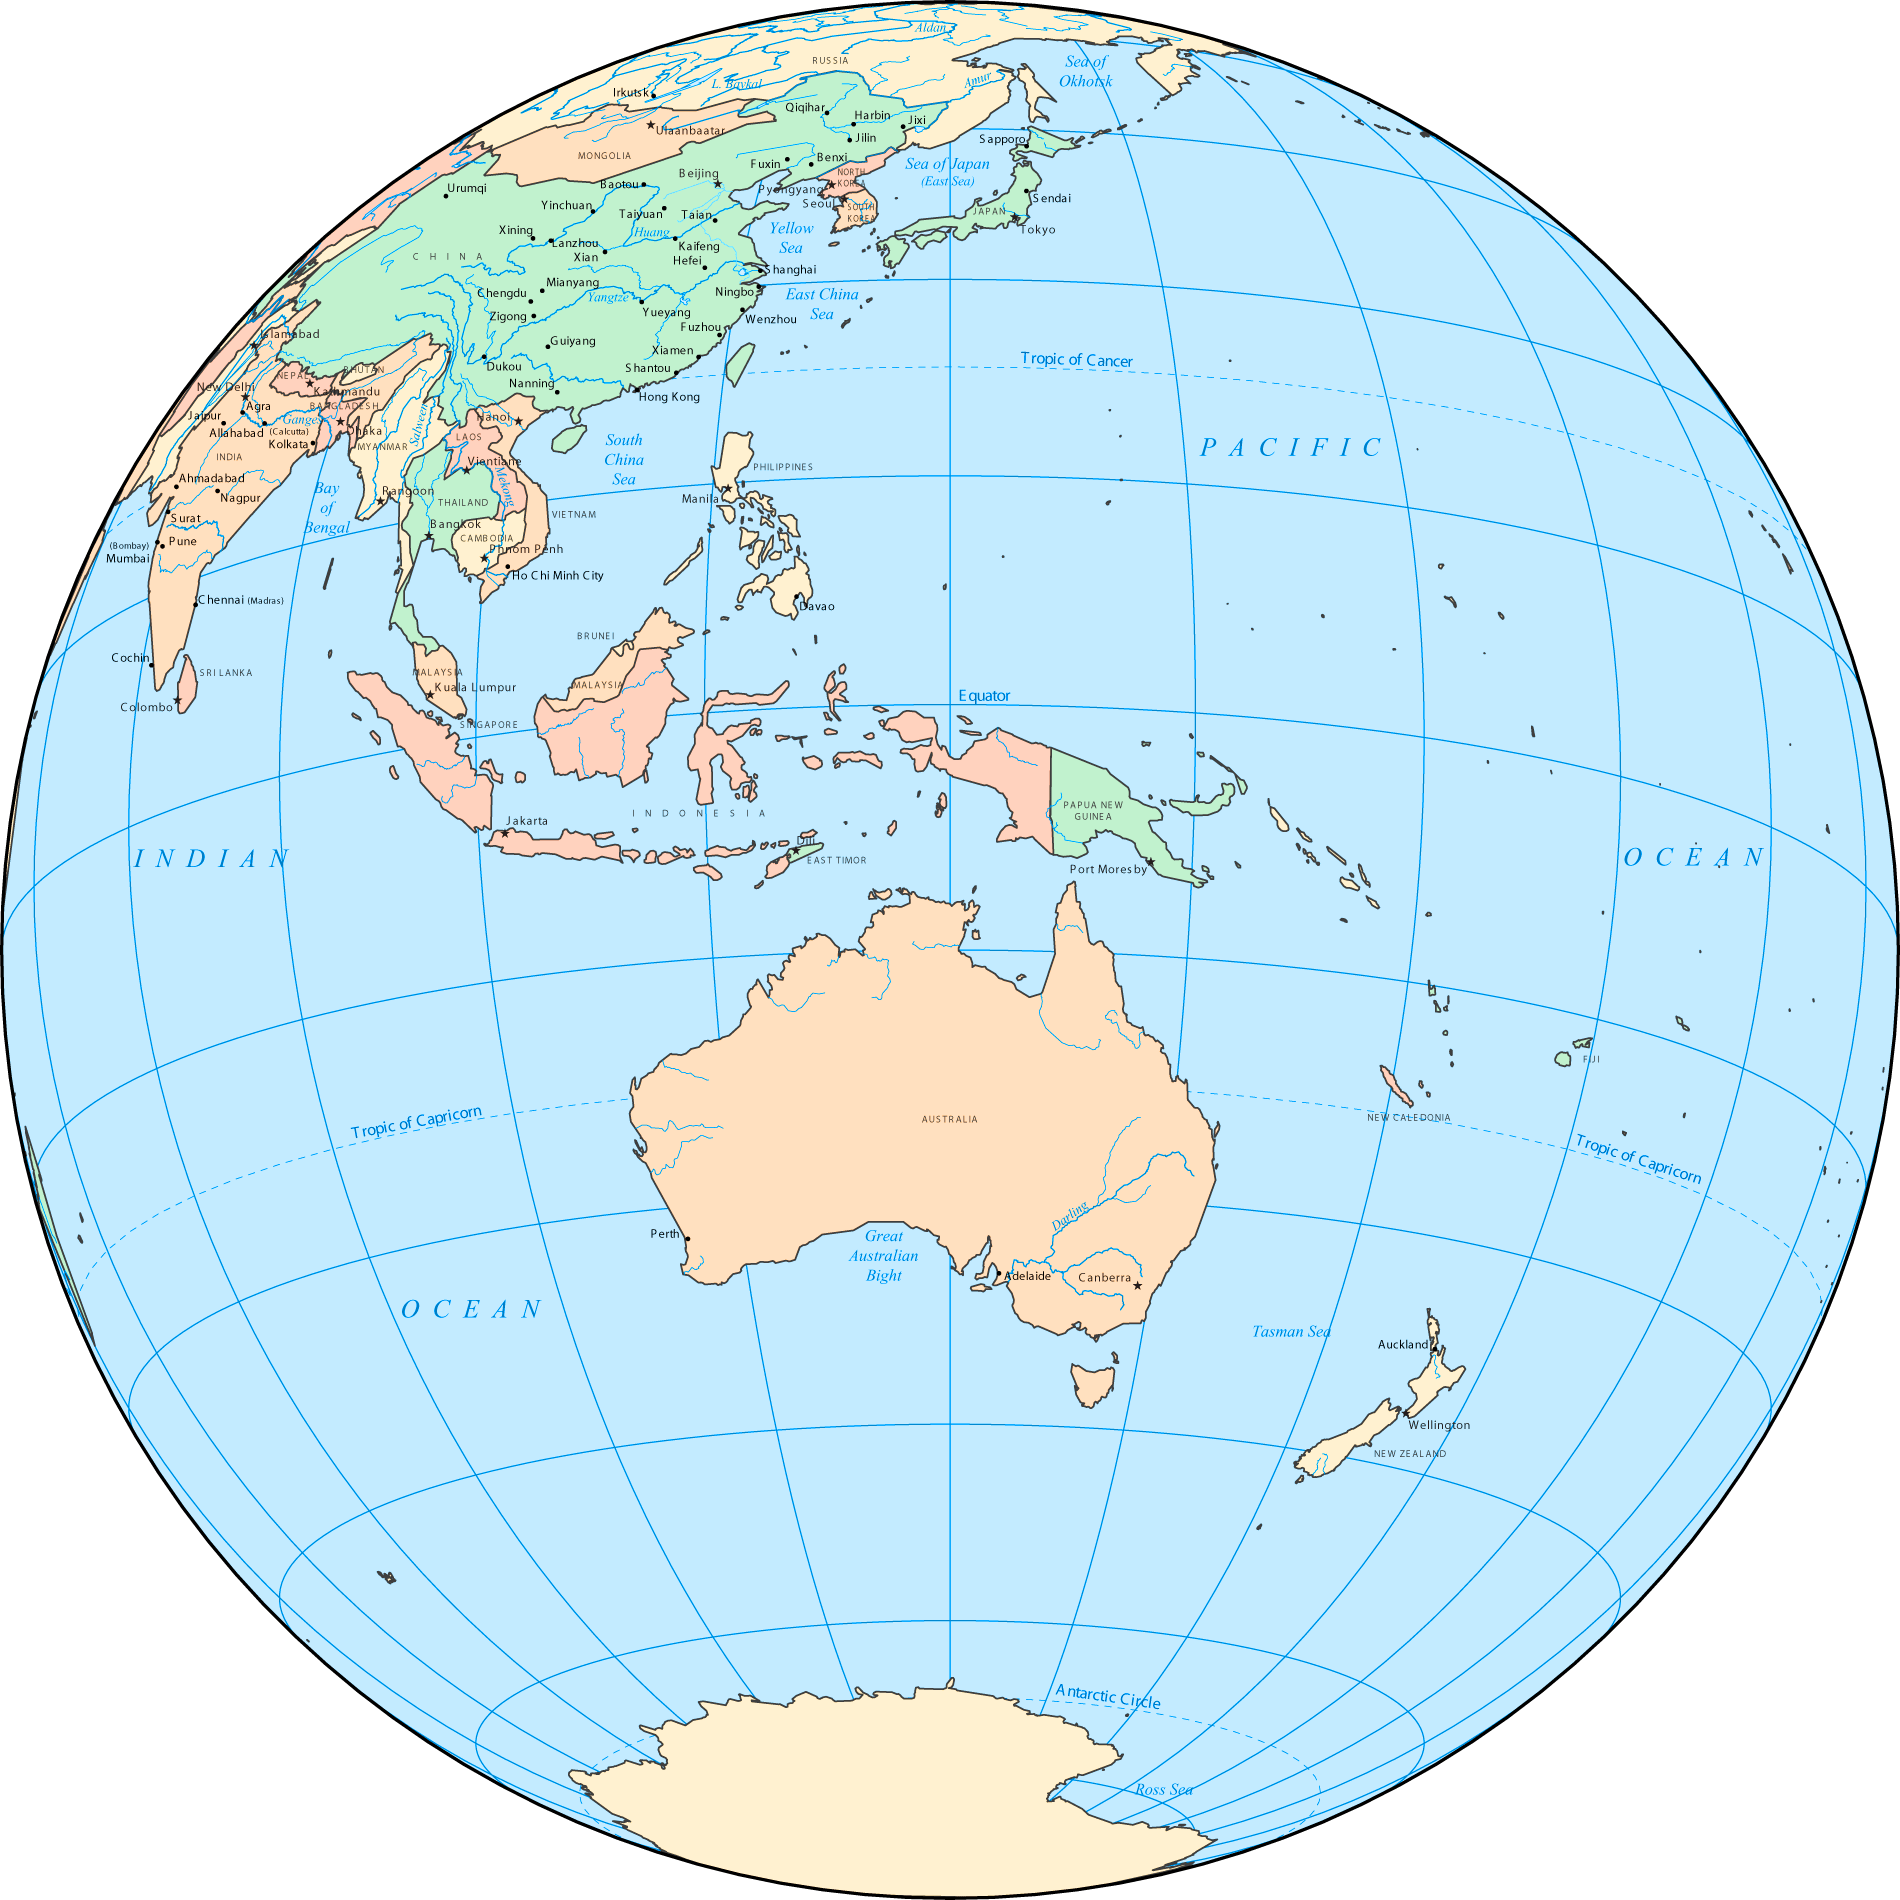 Australia and Oceania on the world map